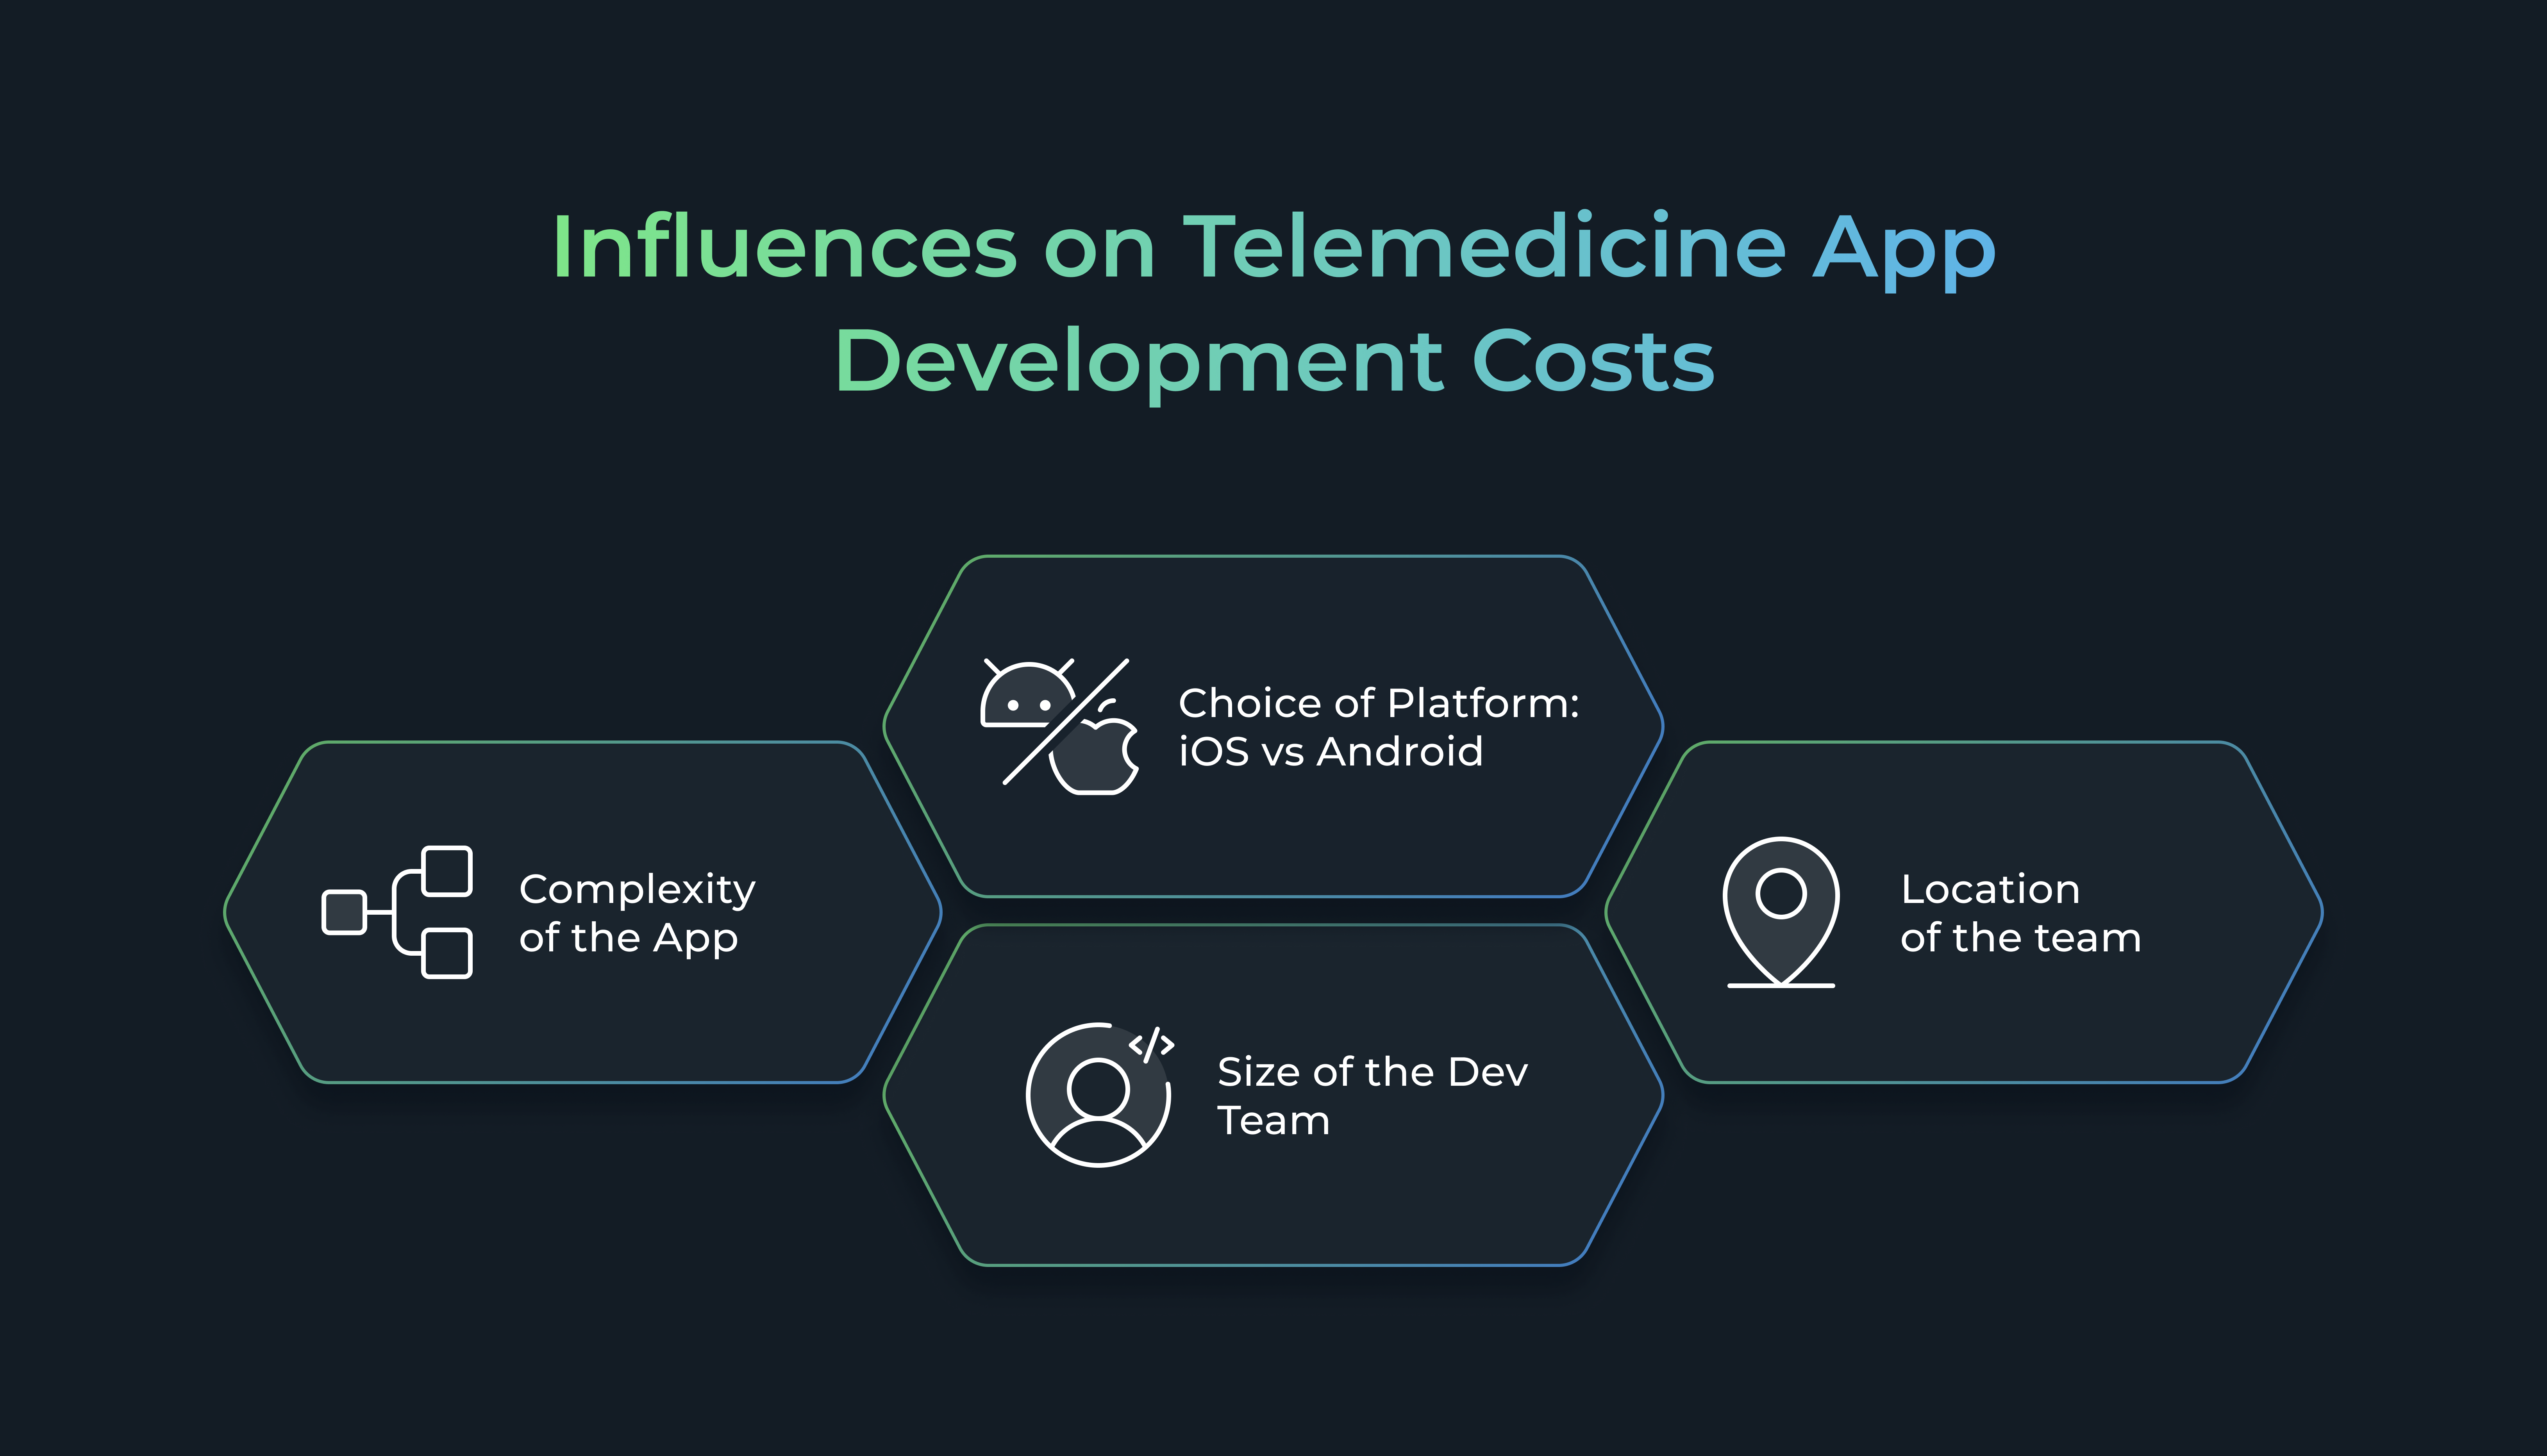 Influences on Telemedicine App Development Costs: Complexity of the App, Choice of Platform: iOS vs Android, Location of the team, Size of the Dev Team